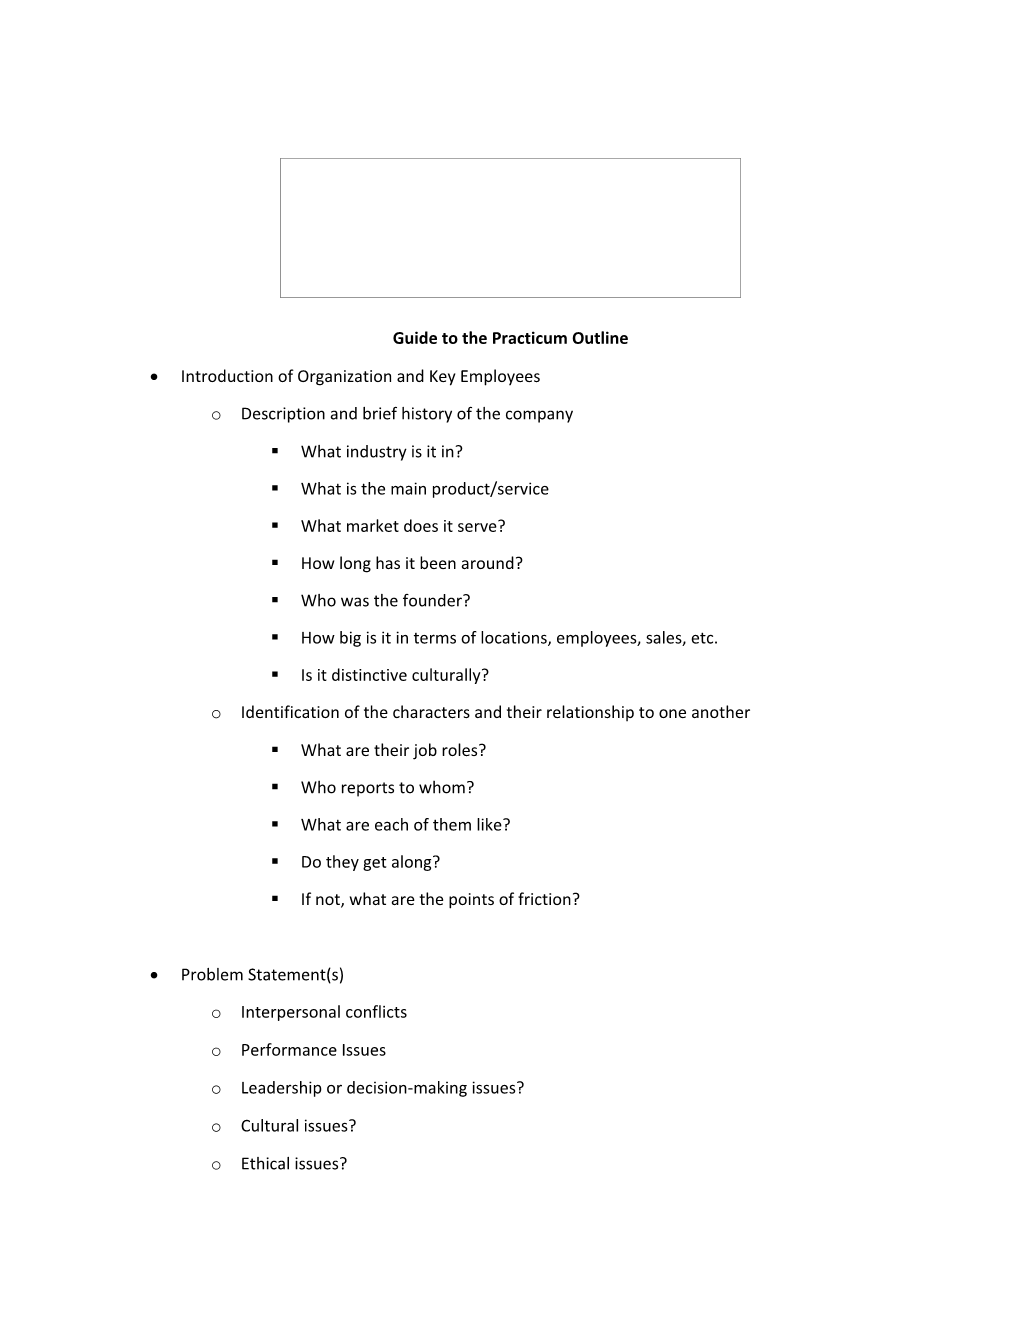 Guide to the Practicum Outline